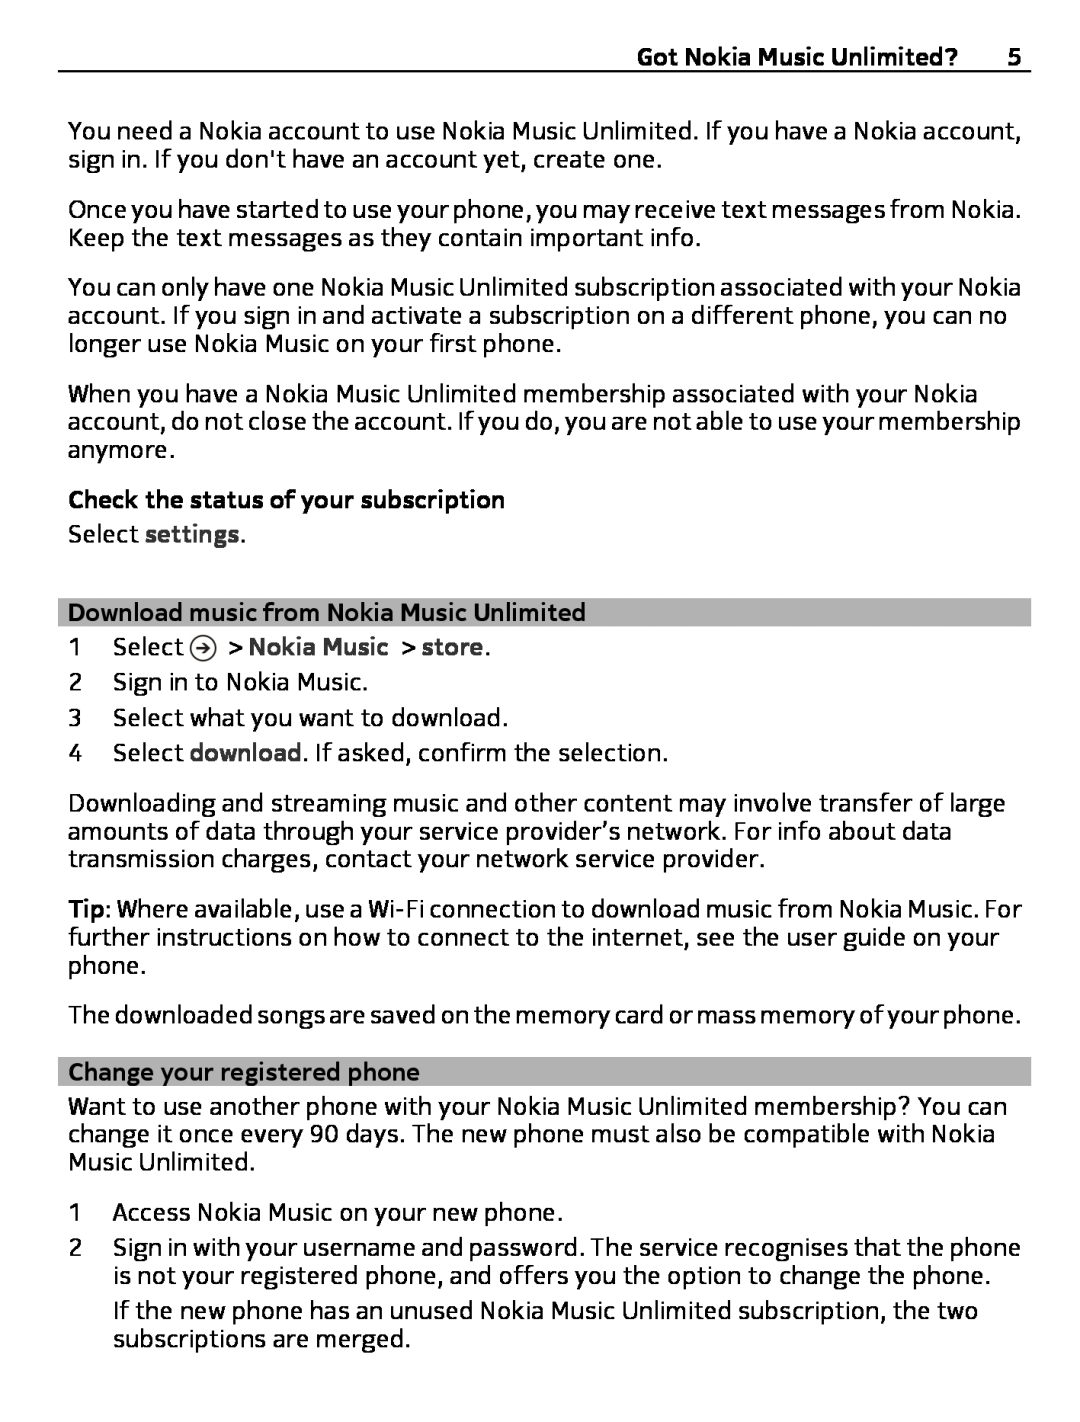 Nokia 1 manual Check the status of your subscription, Download music from Nokia Music Unlimited, Select Nokia Music store 